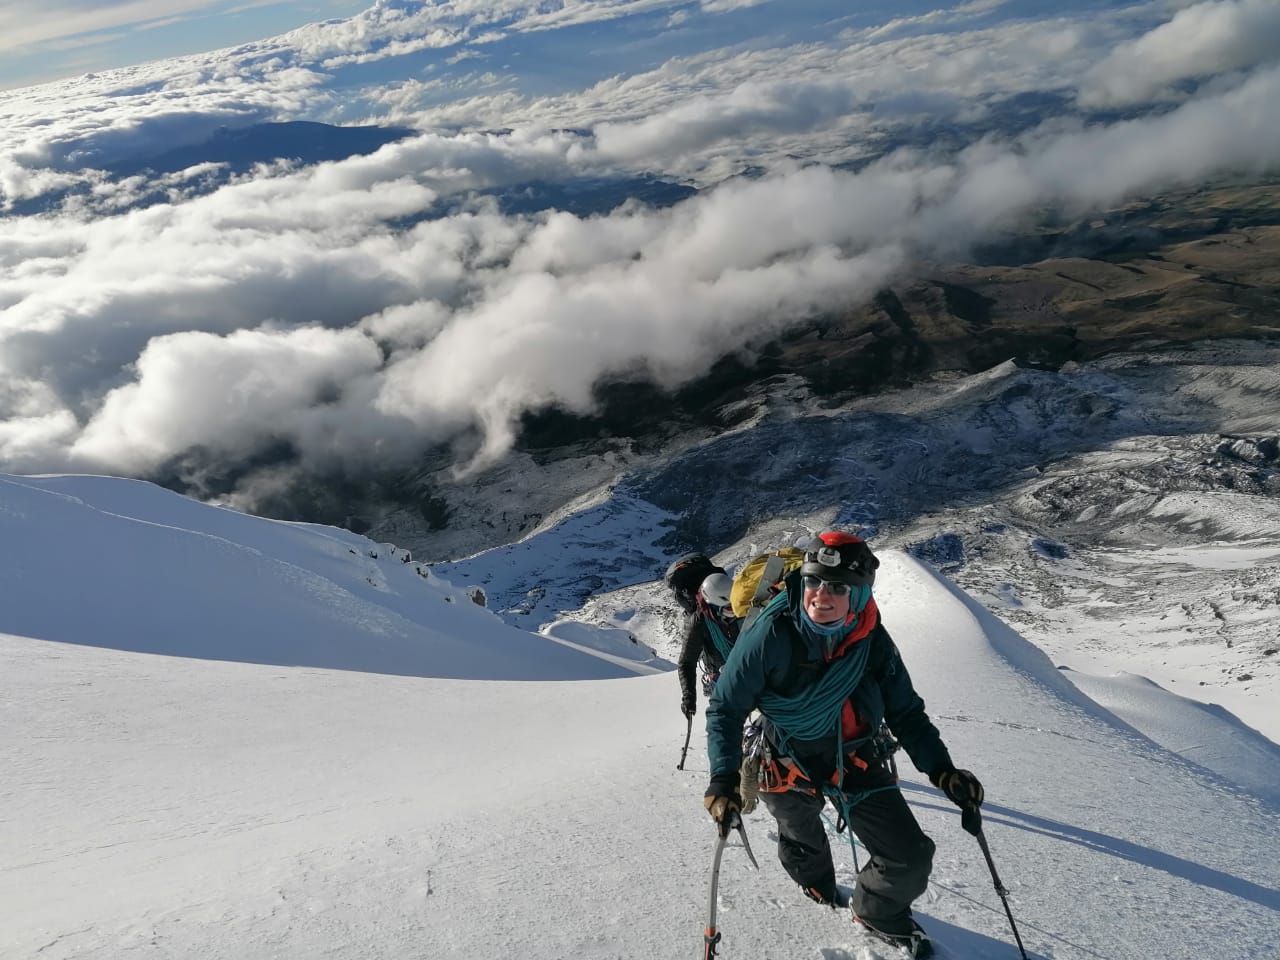 "Join Alpenglow Expeditions Women's Ecuador Climbing School – an empowering journey designed by and for women climbers. Unite with fellow adventurers to explore Ecuador's cultural and mountainous treasures. Conquer technical peaks, from El Altar to the majestic Chimborazo summit, for the ultimate Ecuadorian climbing immersion. Elevate your skills and connections in the heart of the Andes."